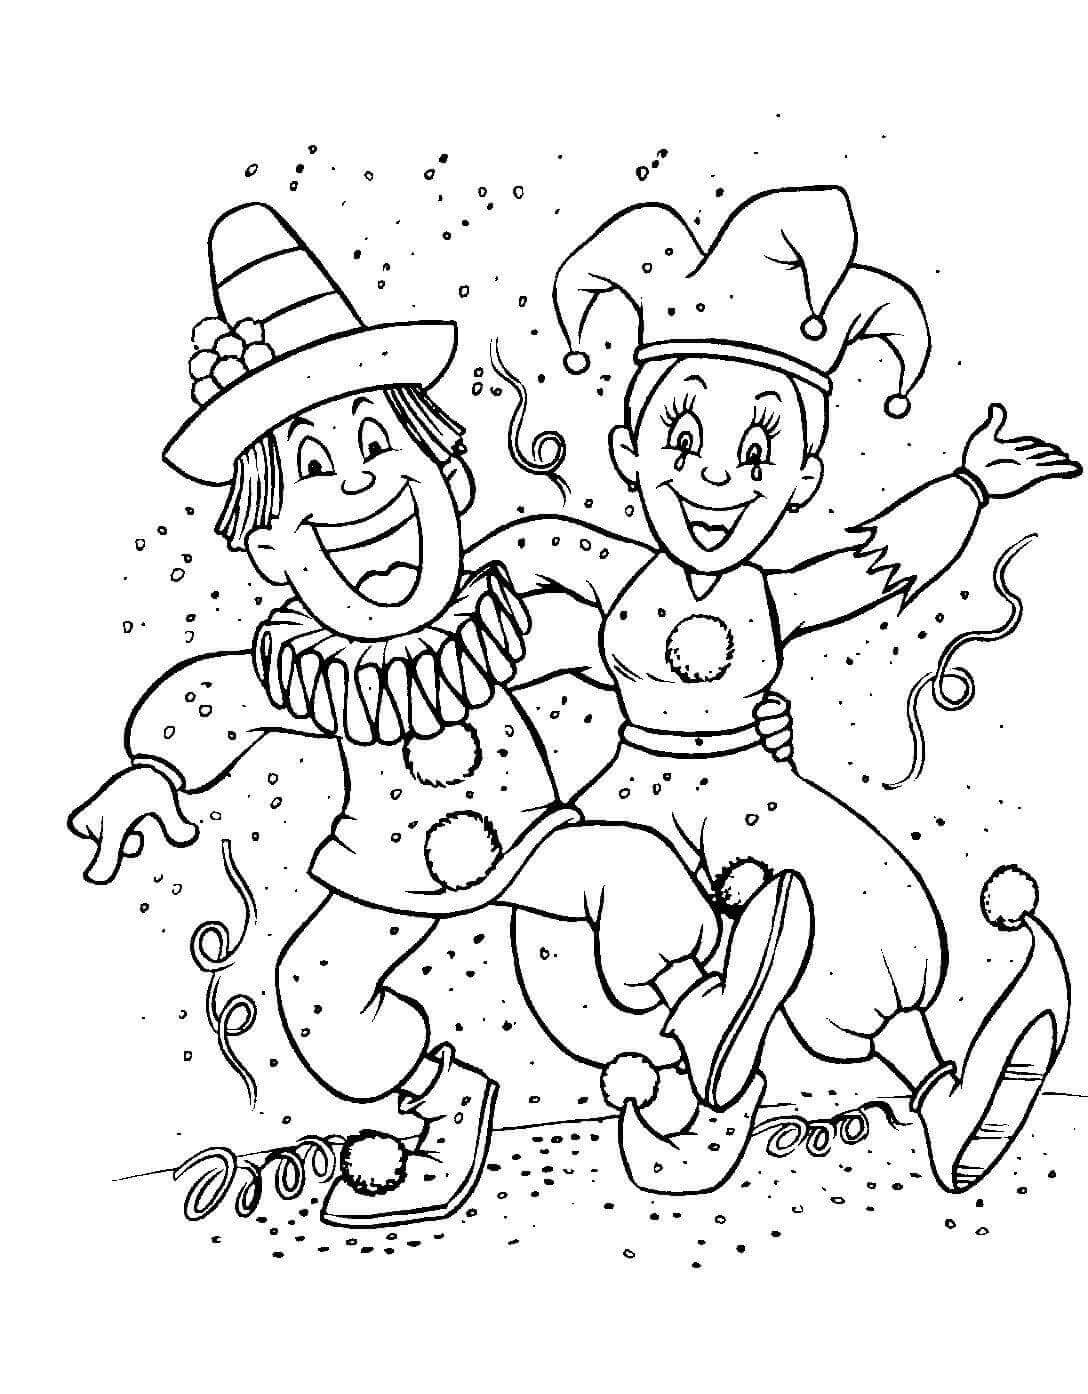 Mardi Gras Coloring Pages Free Printable
 Free Printable Mardi Gras Coloring Pages